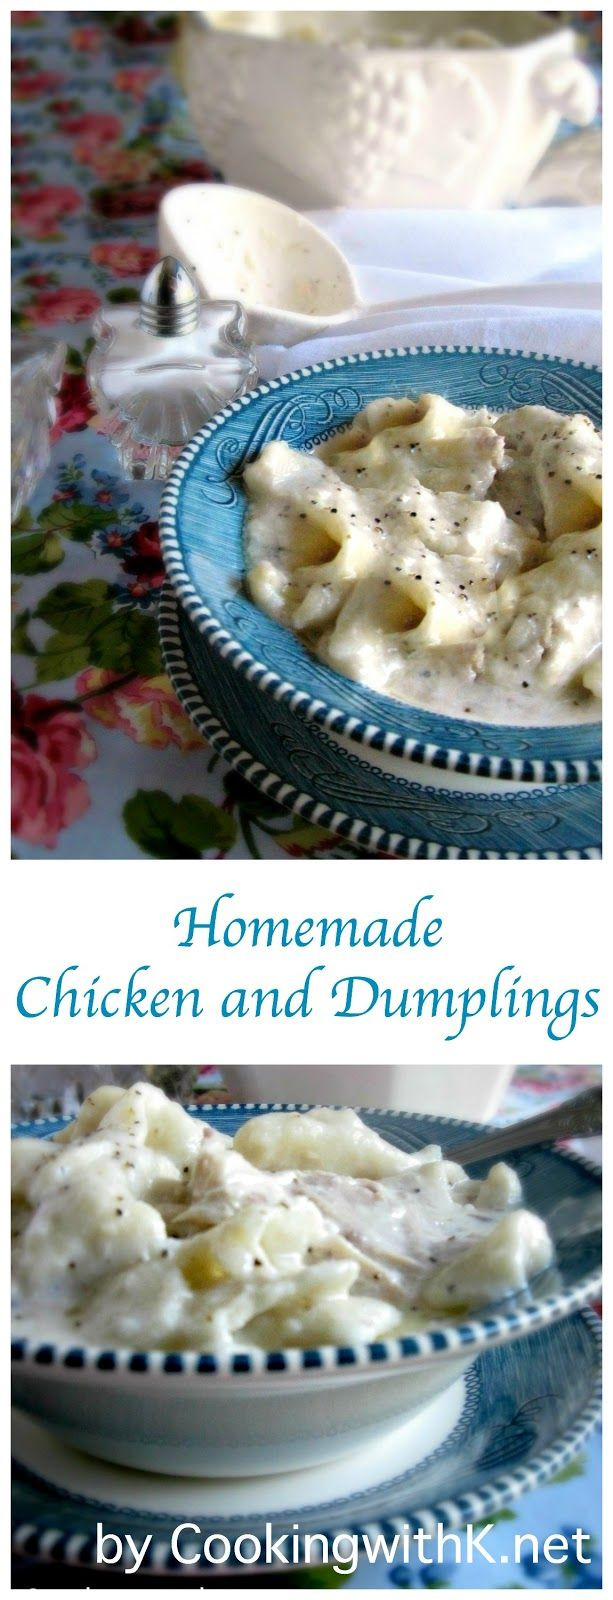 Old Fashioned Southern Chicken And Dumplings Recipe
 Aunt Max s Old Fashioned Homemade Chicken and Dumplings